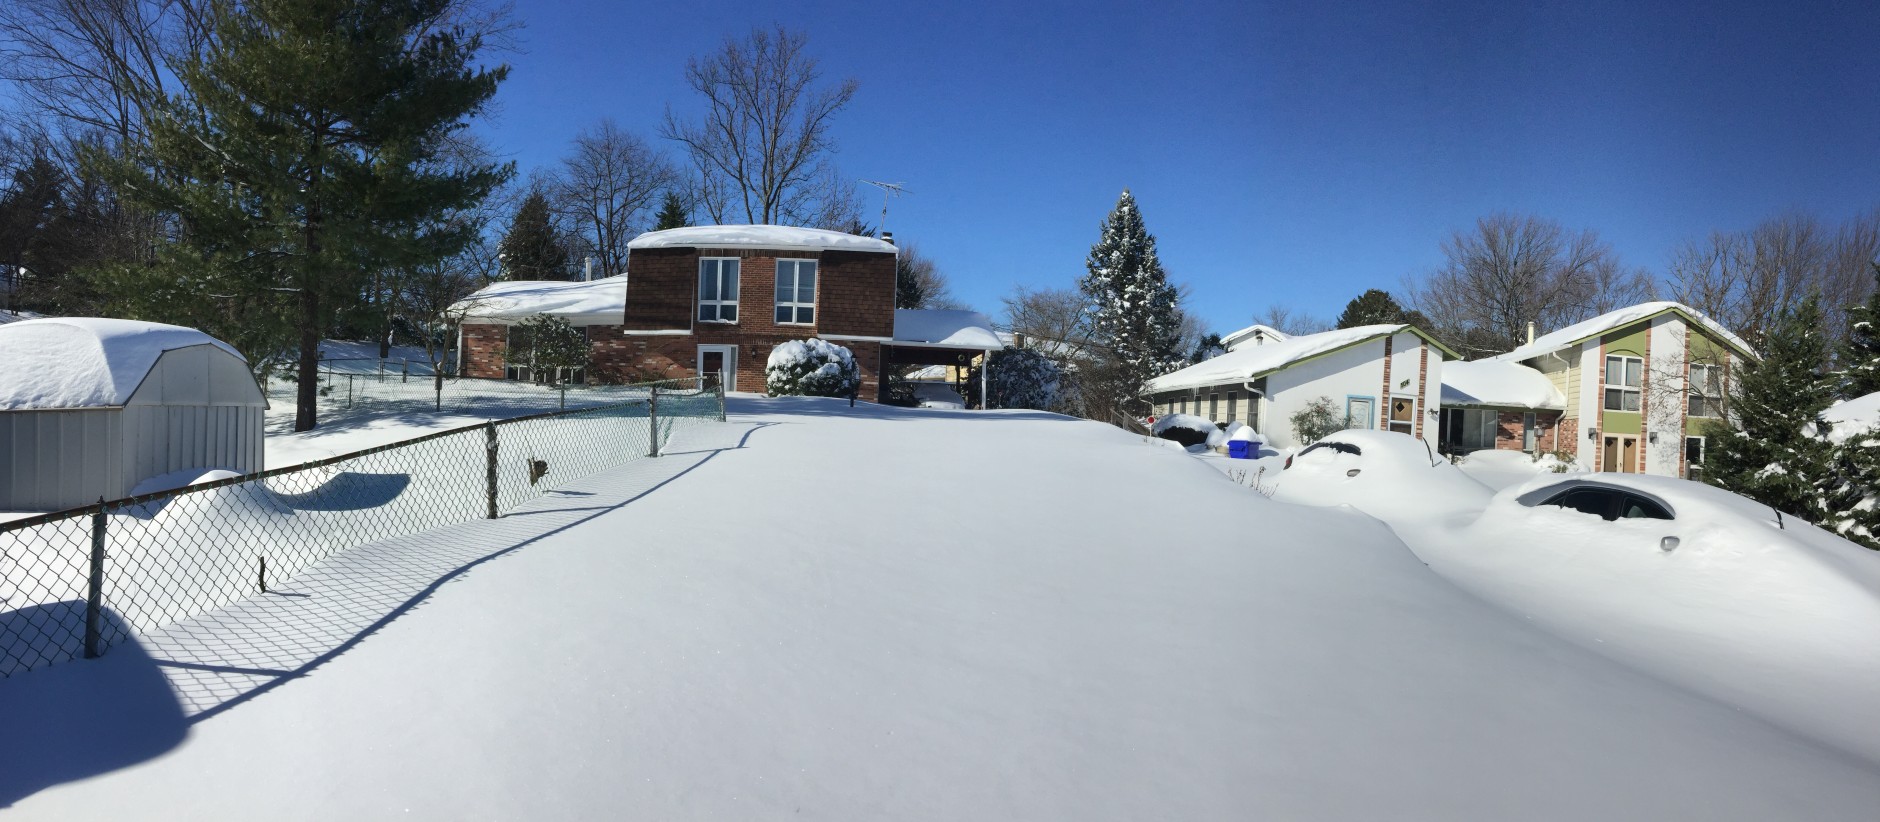 A WTOP listener shared this photo of a snowed-in home following a historic blizzard that dumped a record amount of snow throughout the Washington, D.C. region. (Submitted photo)